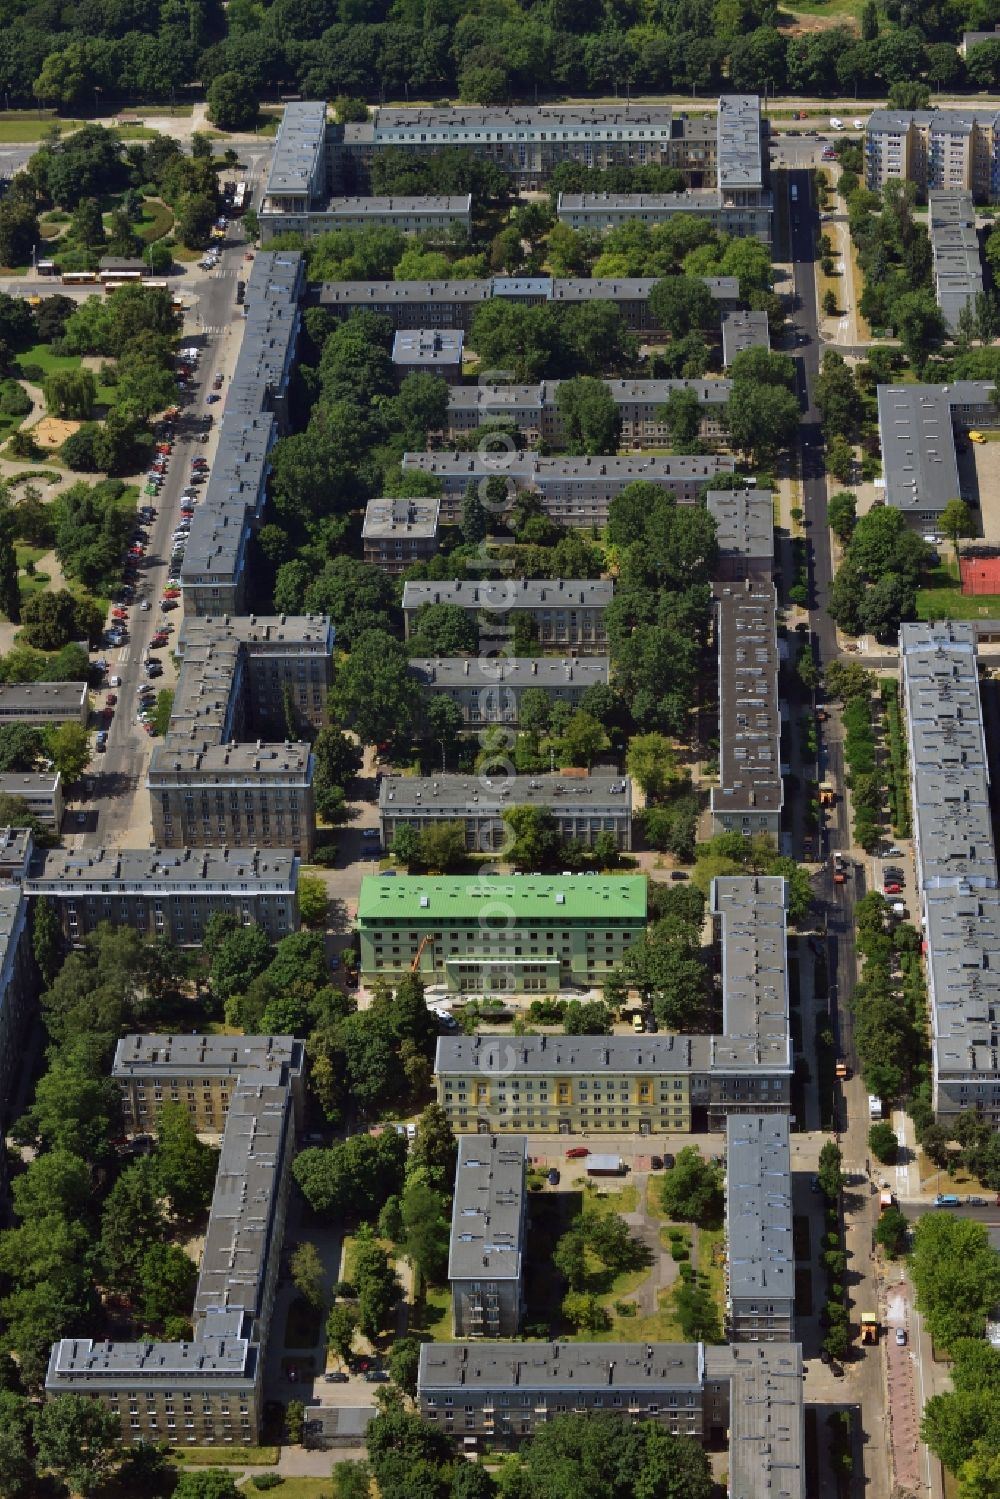 Aerial image Warschau - The revenue office of the borough of Targowek in Warsaw in Poland. The distinct historic building with its green roof is located amidst a residential area and estate near the park Placu Hallera which is further to the West. Visible here are the well trimmed lawns and trees of the public green